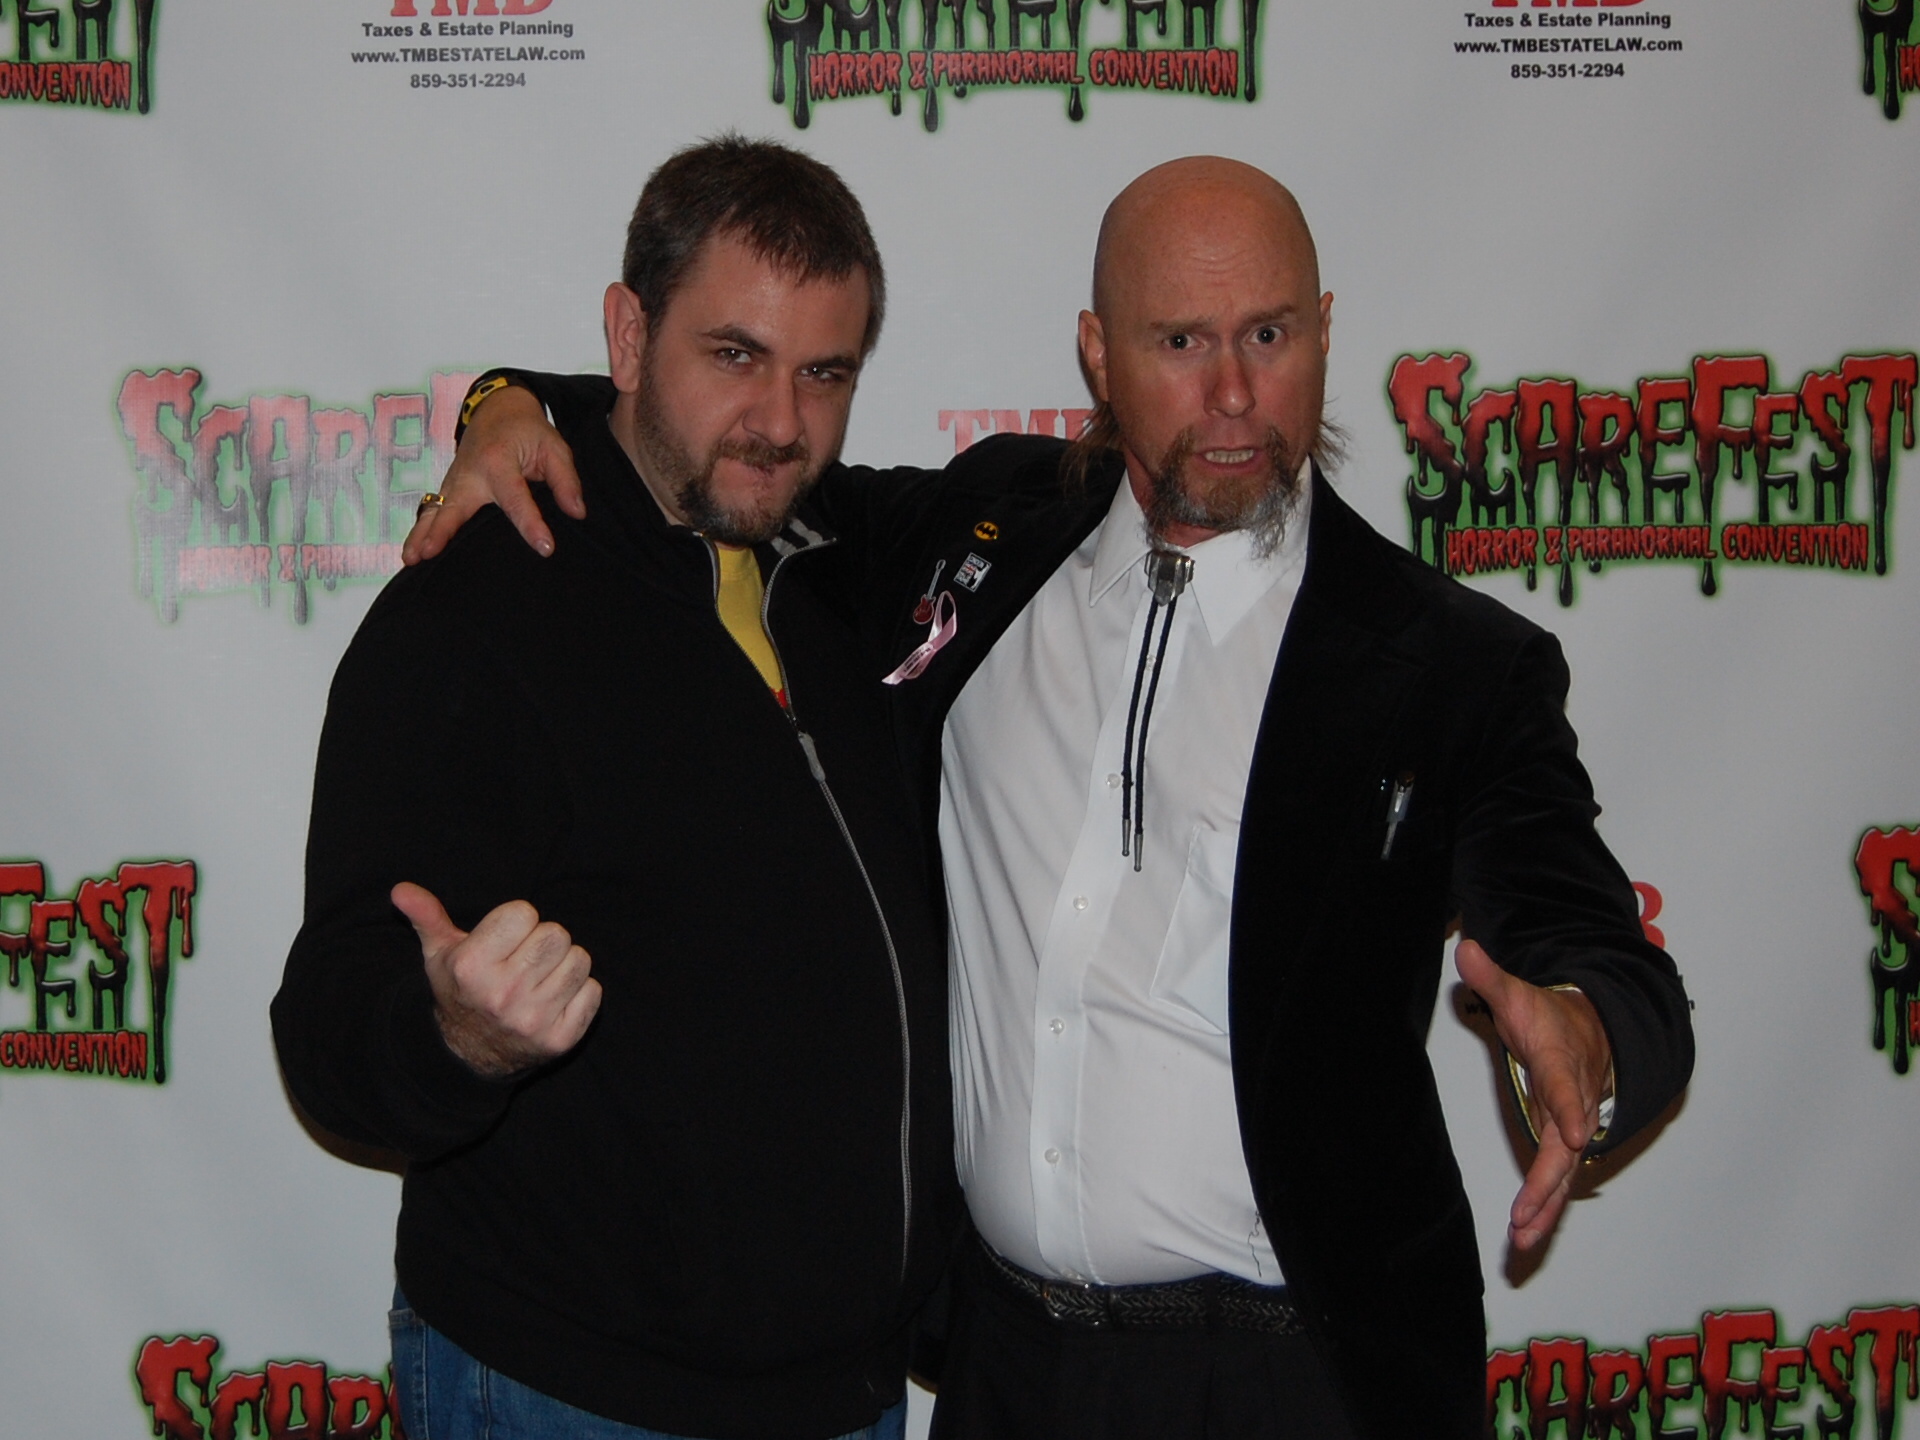 Mike Holman and David Fultz. David is the MC of the Scarefest